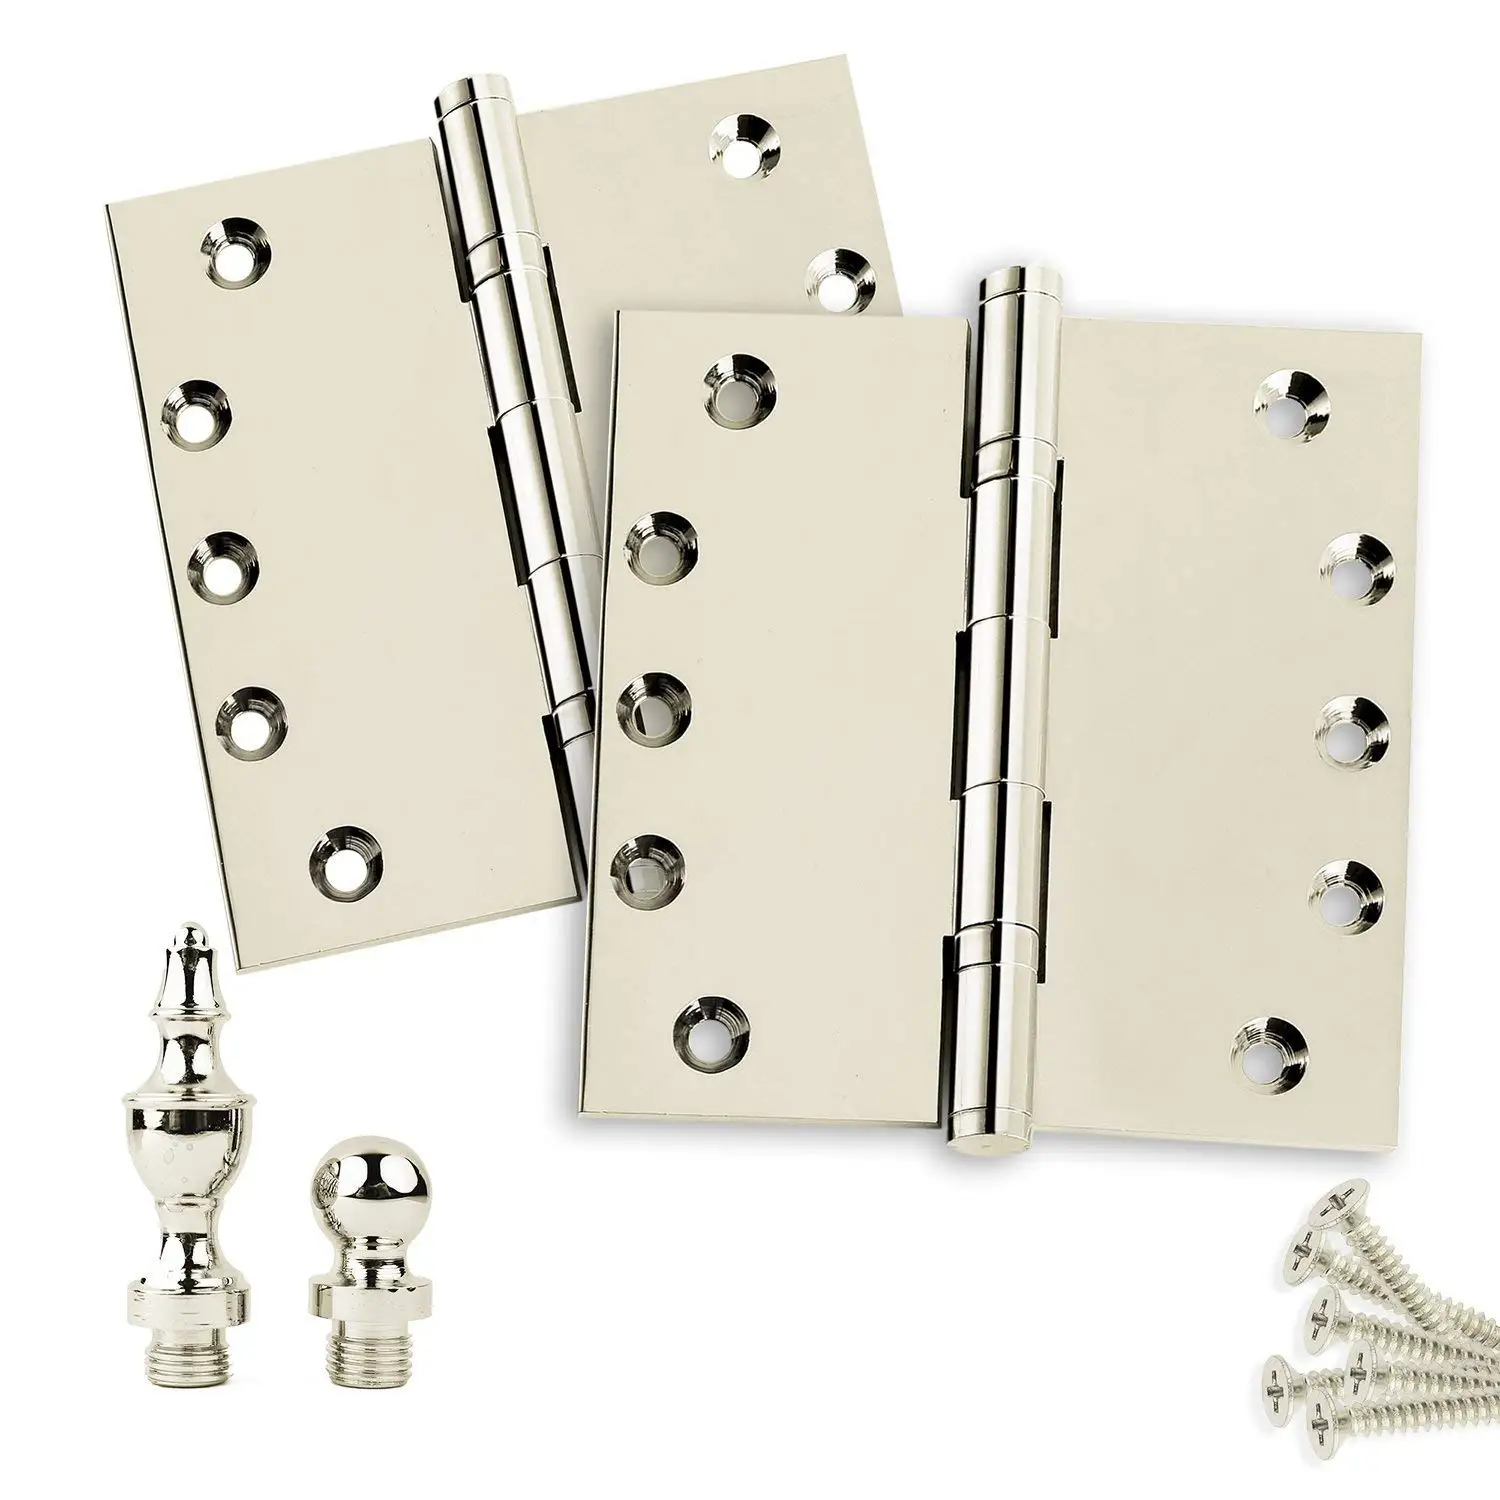 US14 Architectural Grade 2 Door Hinges 4 x 4 Extruded Solid Brass Ball Bearing Hinge Heavy Duty Polished Nickel Ball//Urn//Button Tips Included Stainless Steel Pin